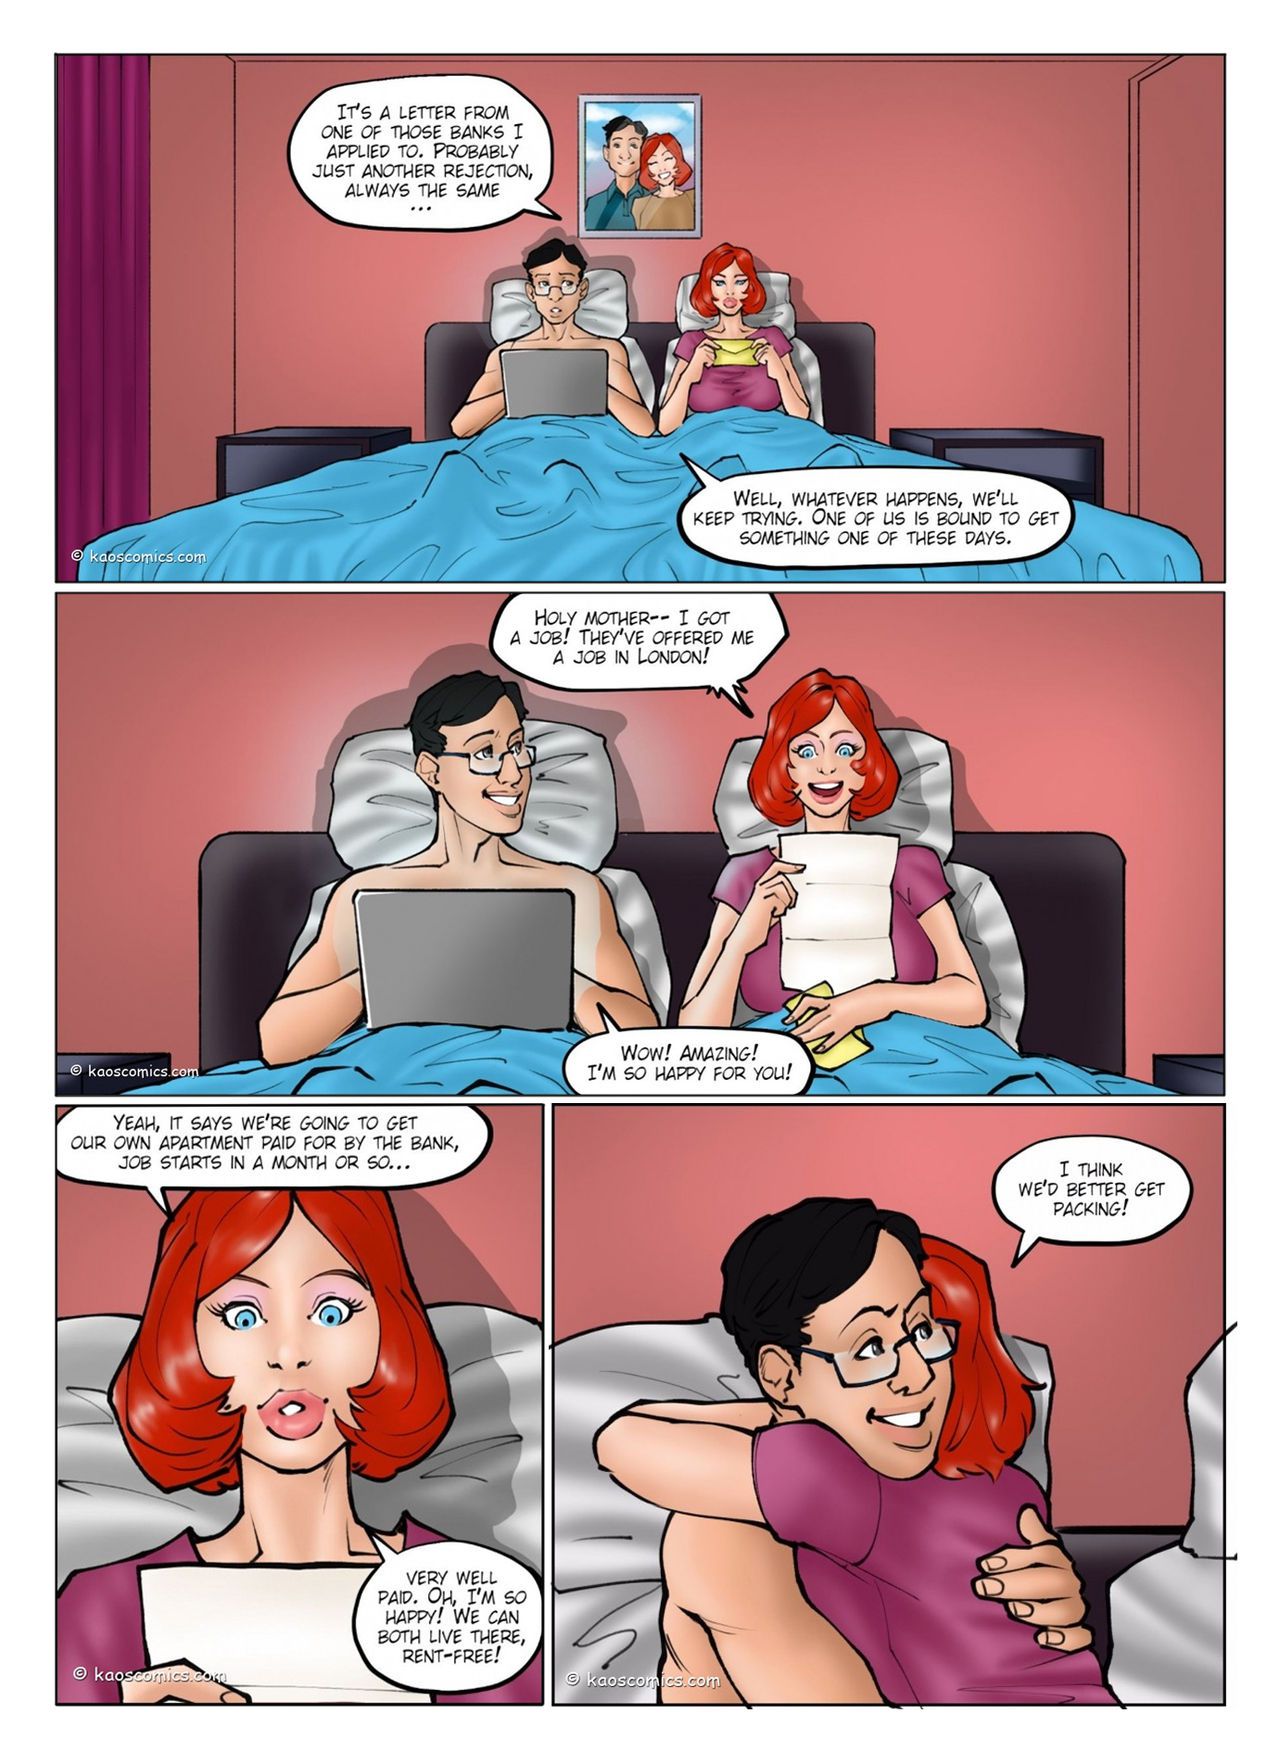 [Kaos] Annabelle's New Life 1 (Full Pages) 2